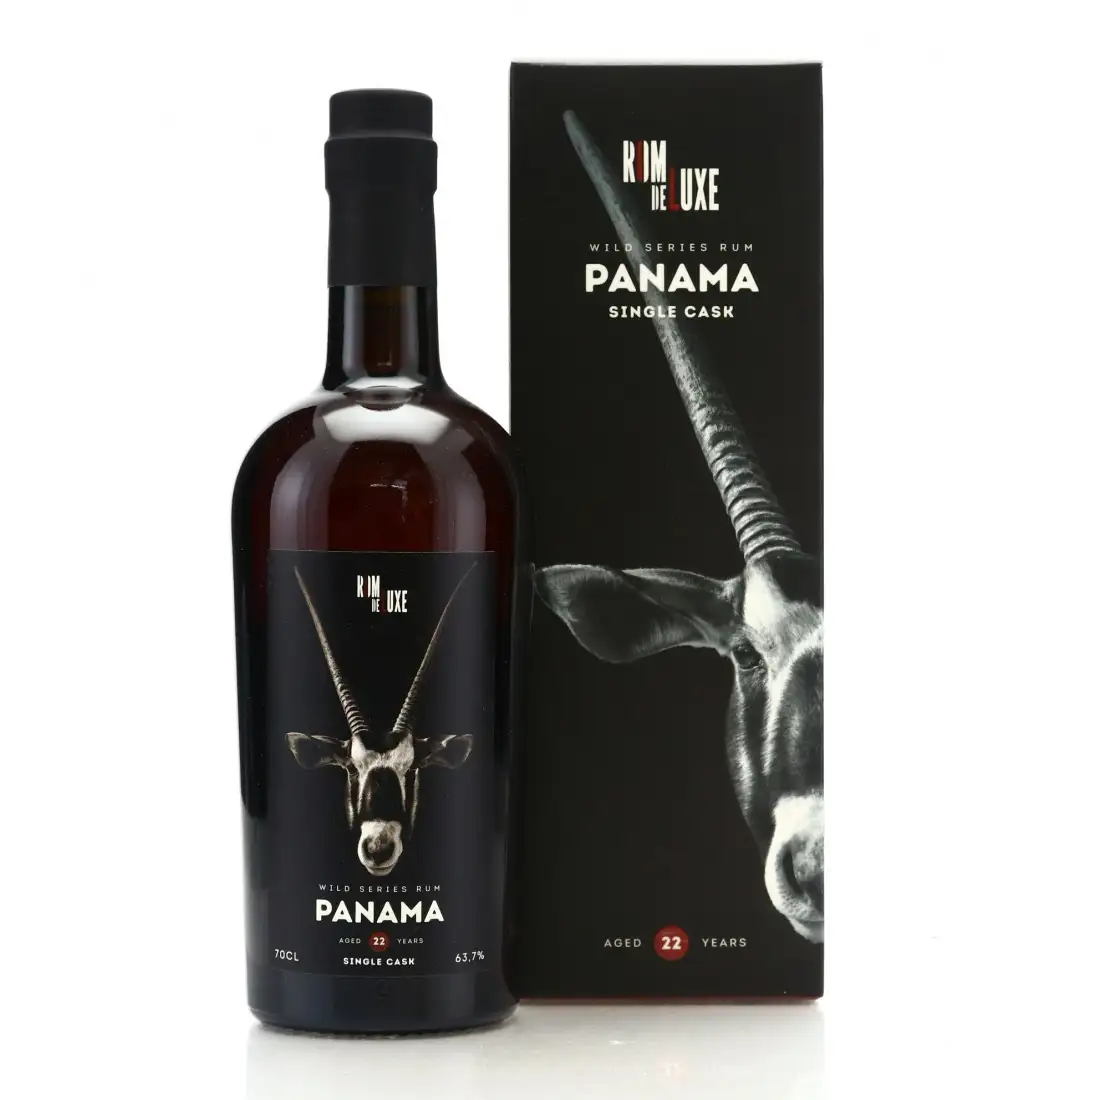 Image of the front of the bottle of the rum Wild Series Rum Panama No. 24 (Batch 2)